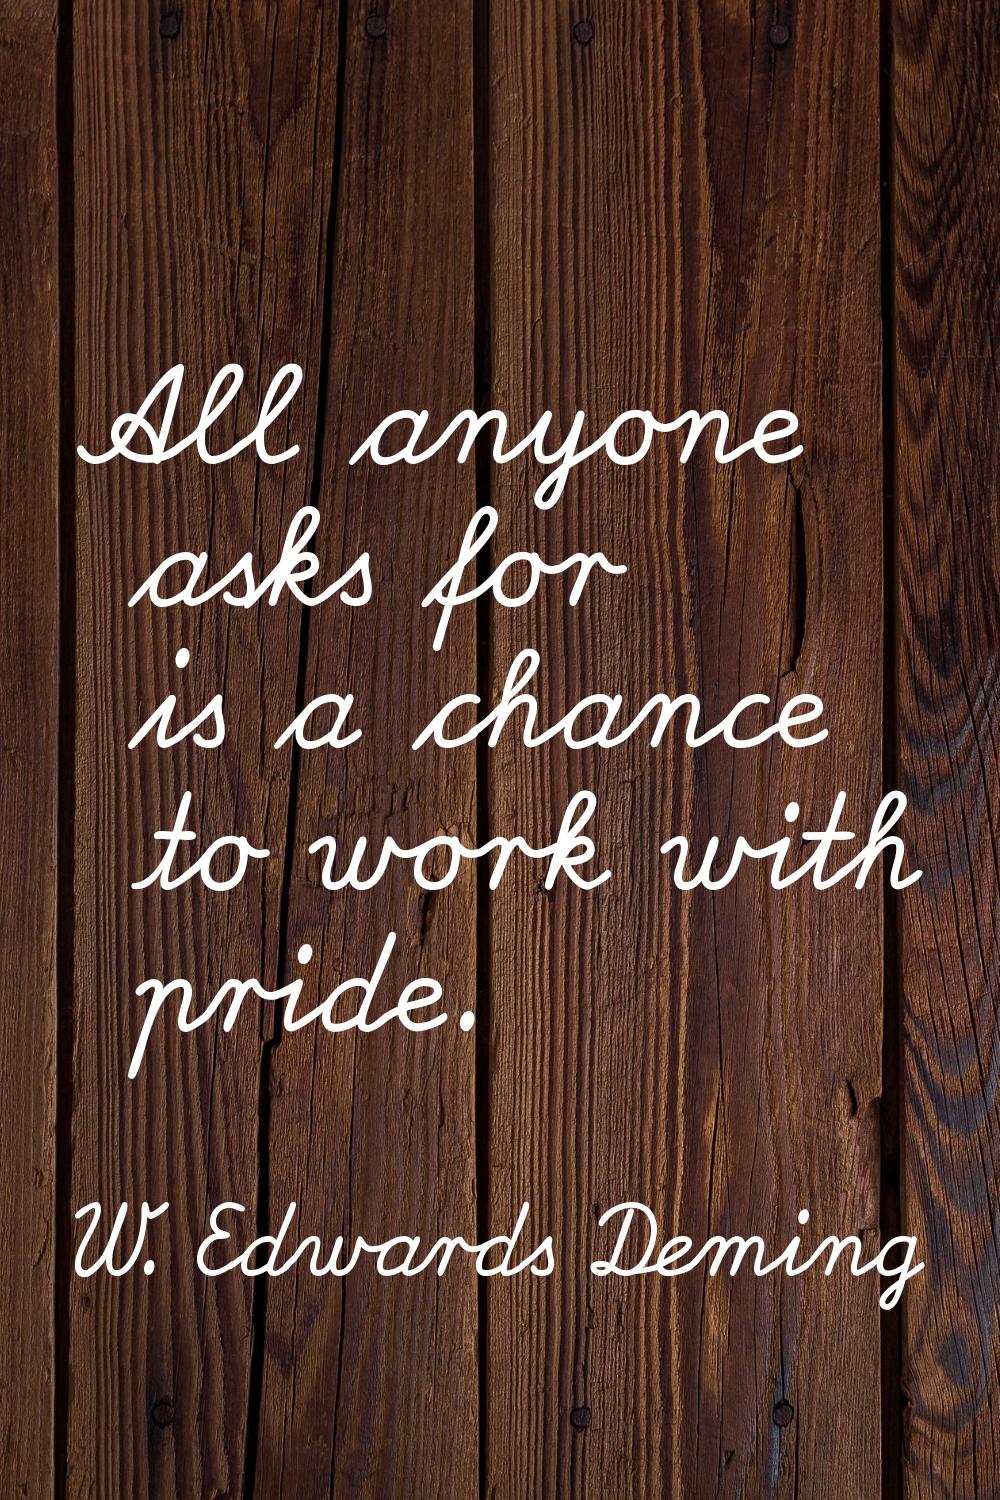 All anyone asks for is a chance to work with pride.